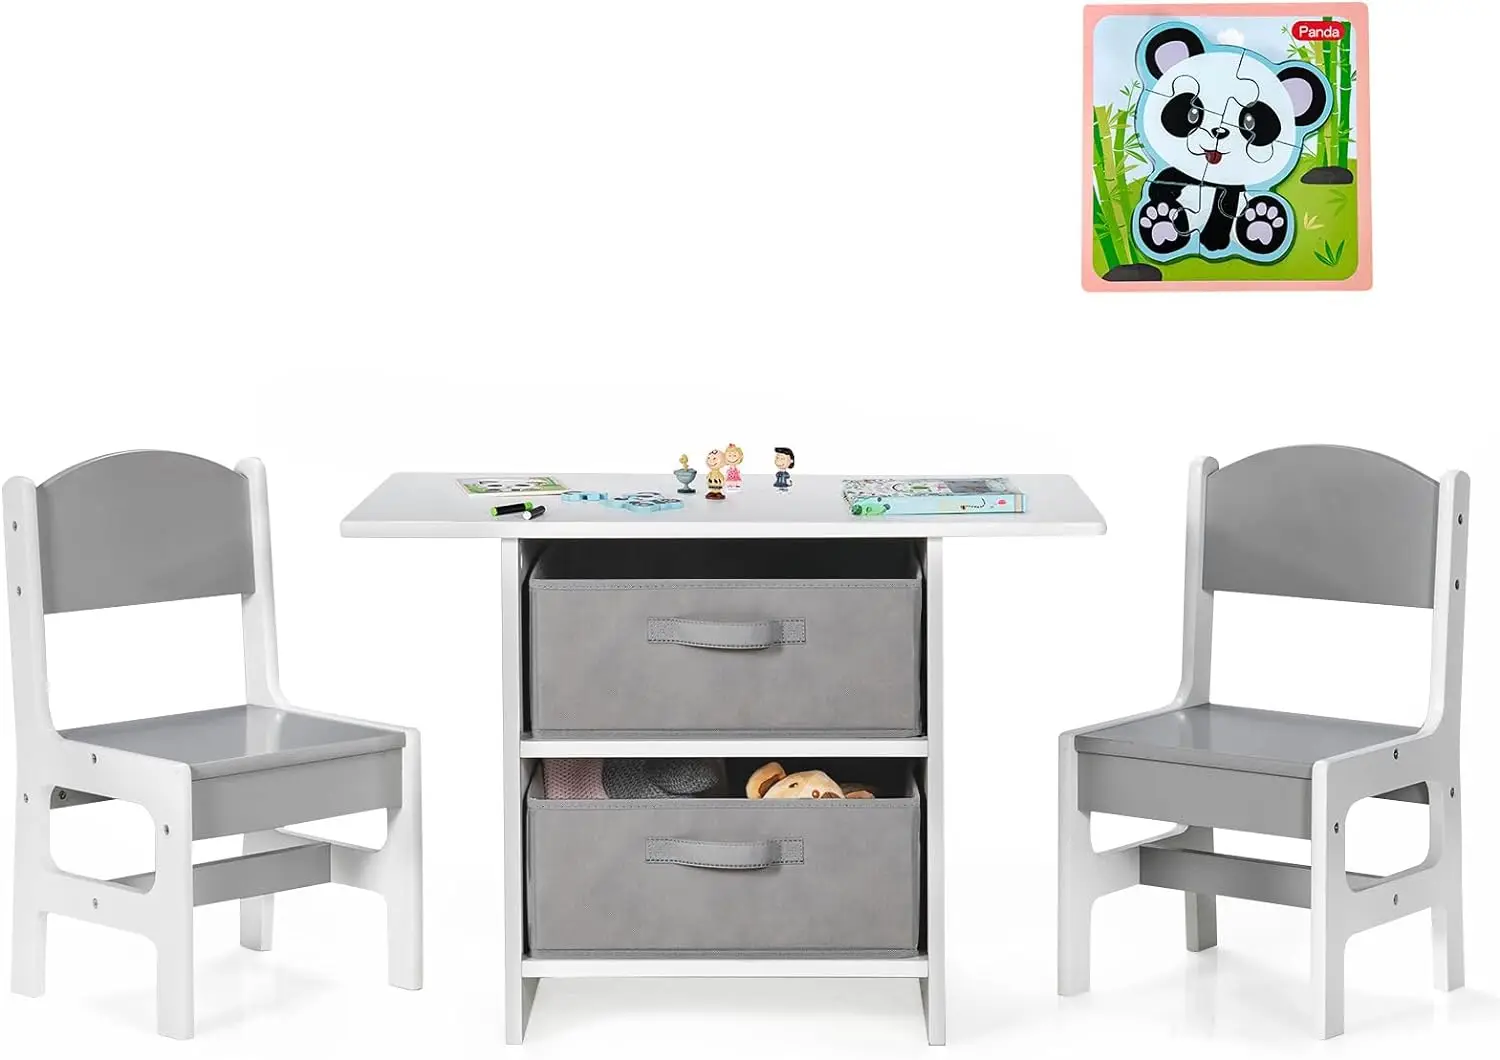 Kids Table and Chair Set, Wood Table w/Toy Storage Baskets, Jigsaw Puzzl... - $198.29